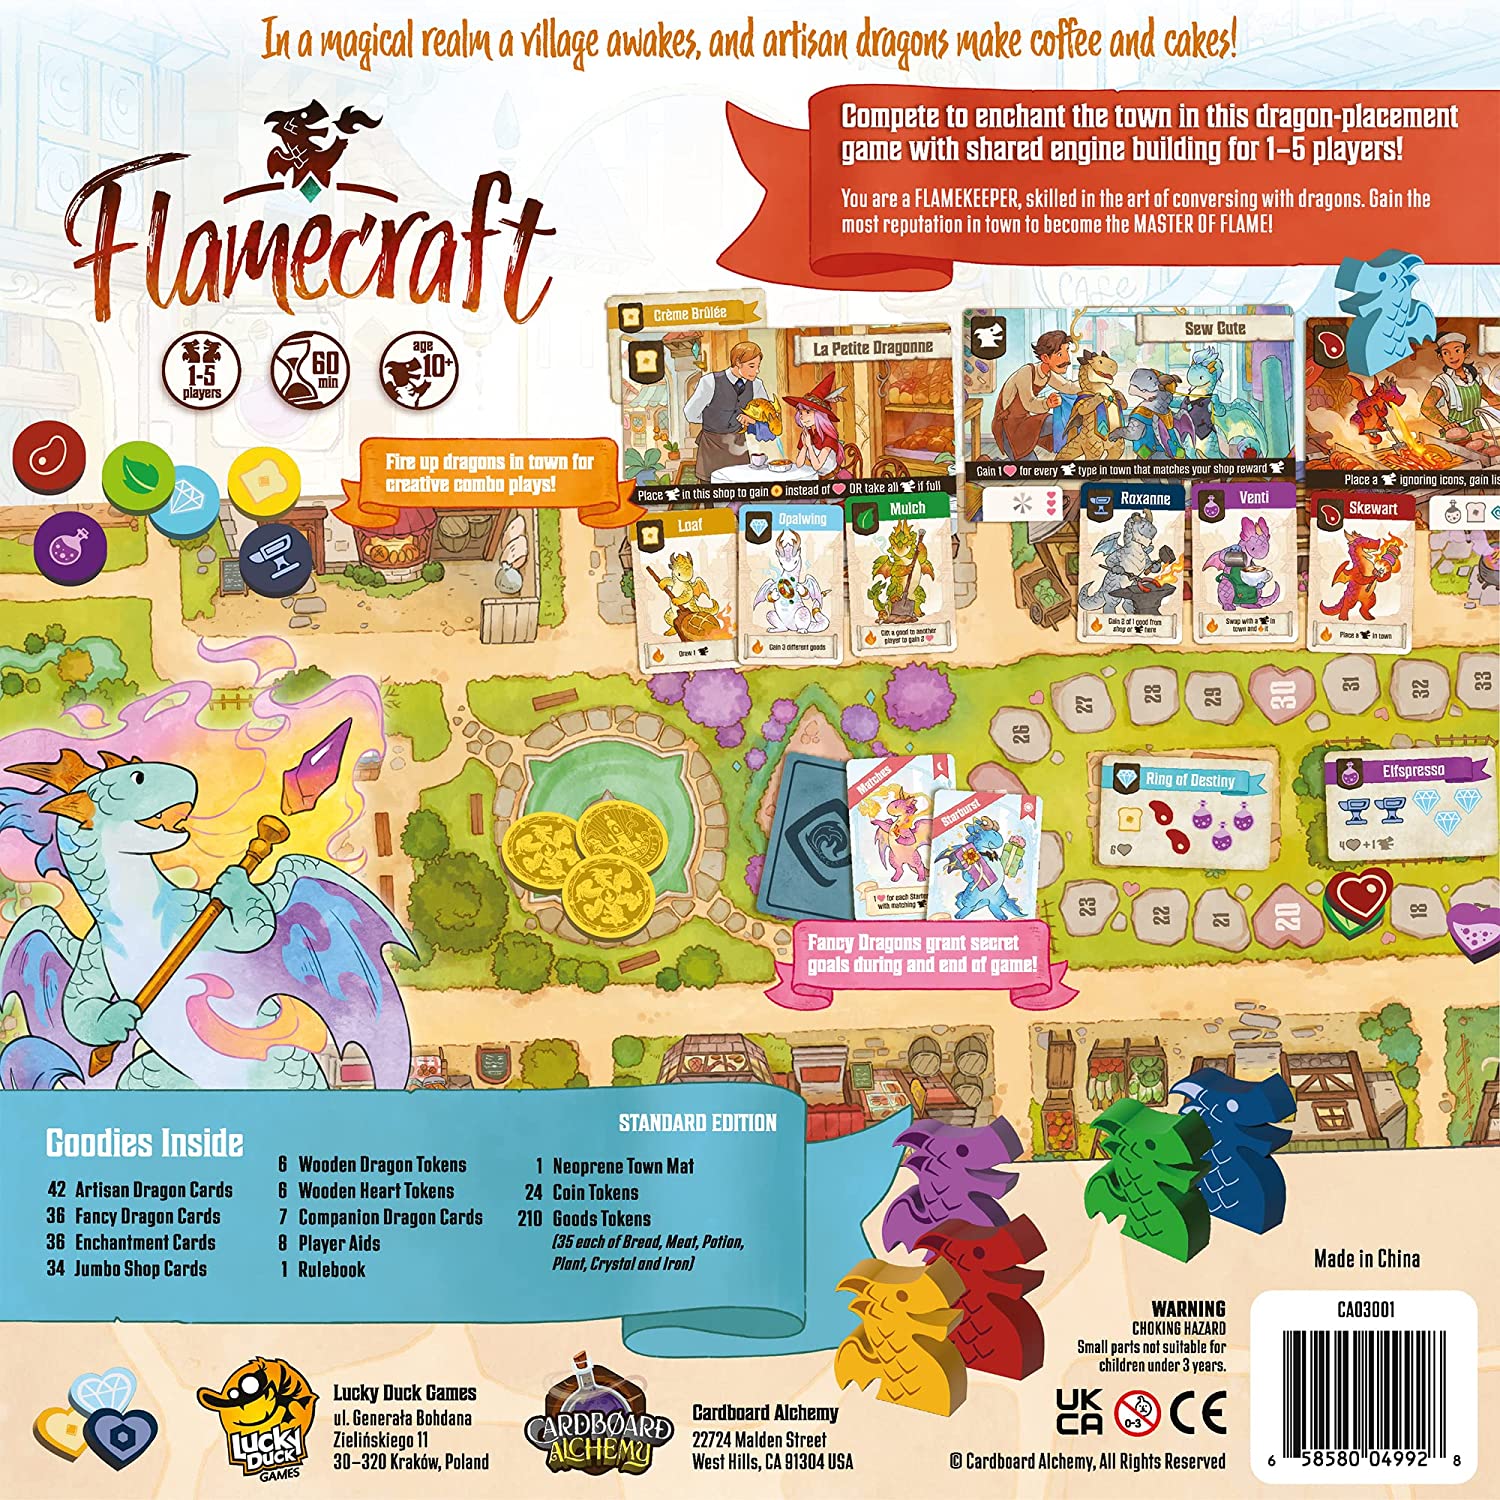 Flamecraft Board game back of box and contents cute blue dragon